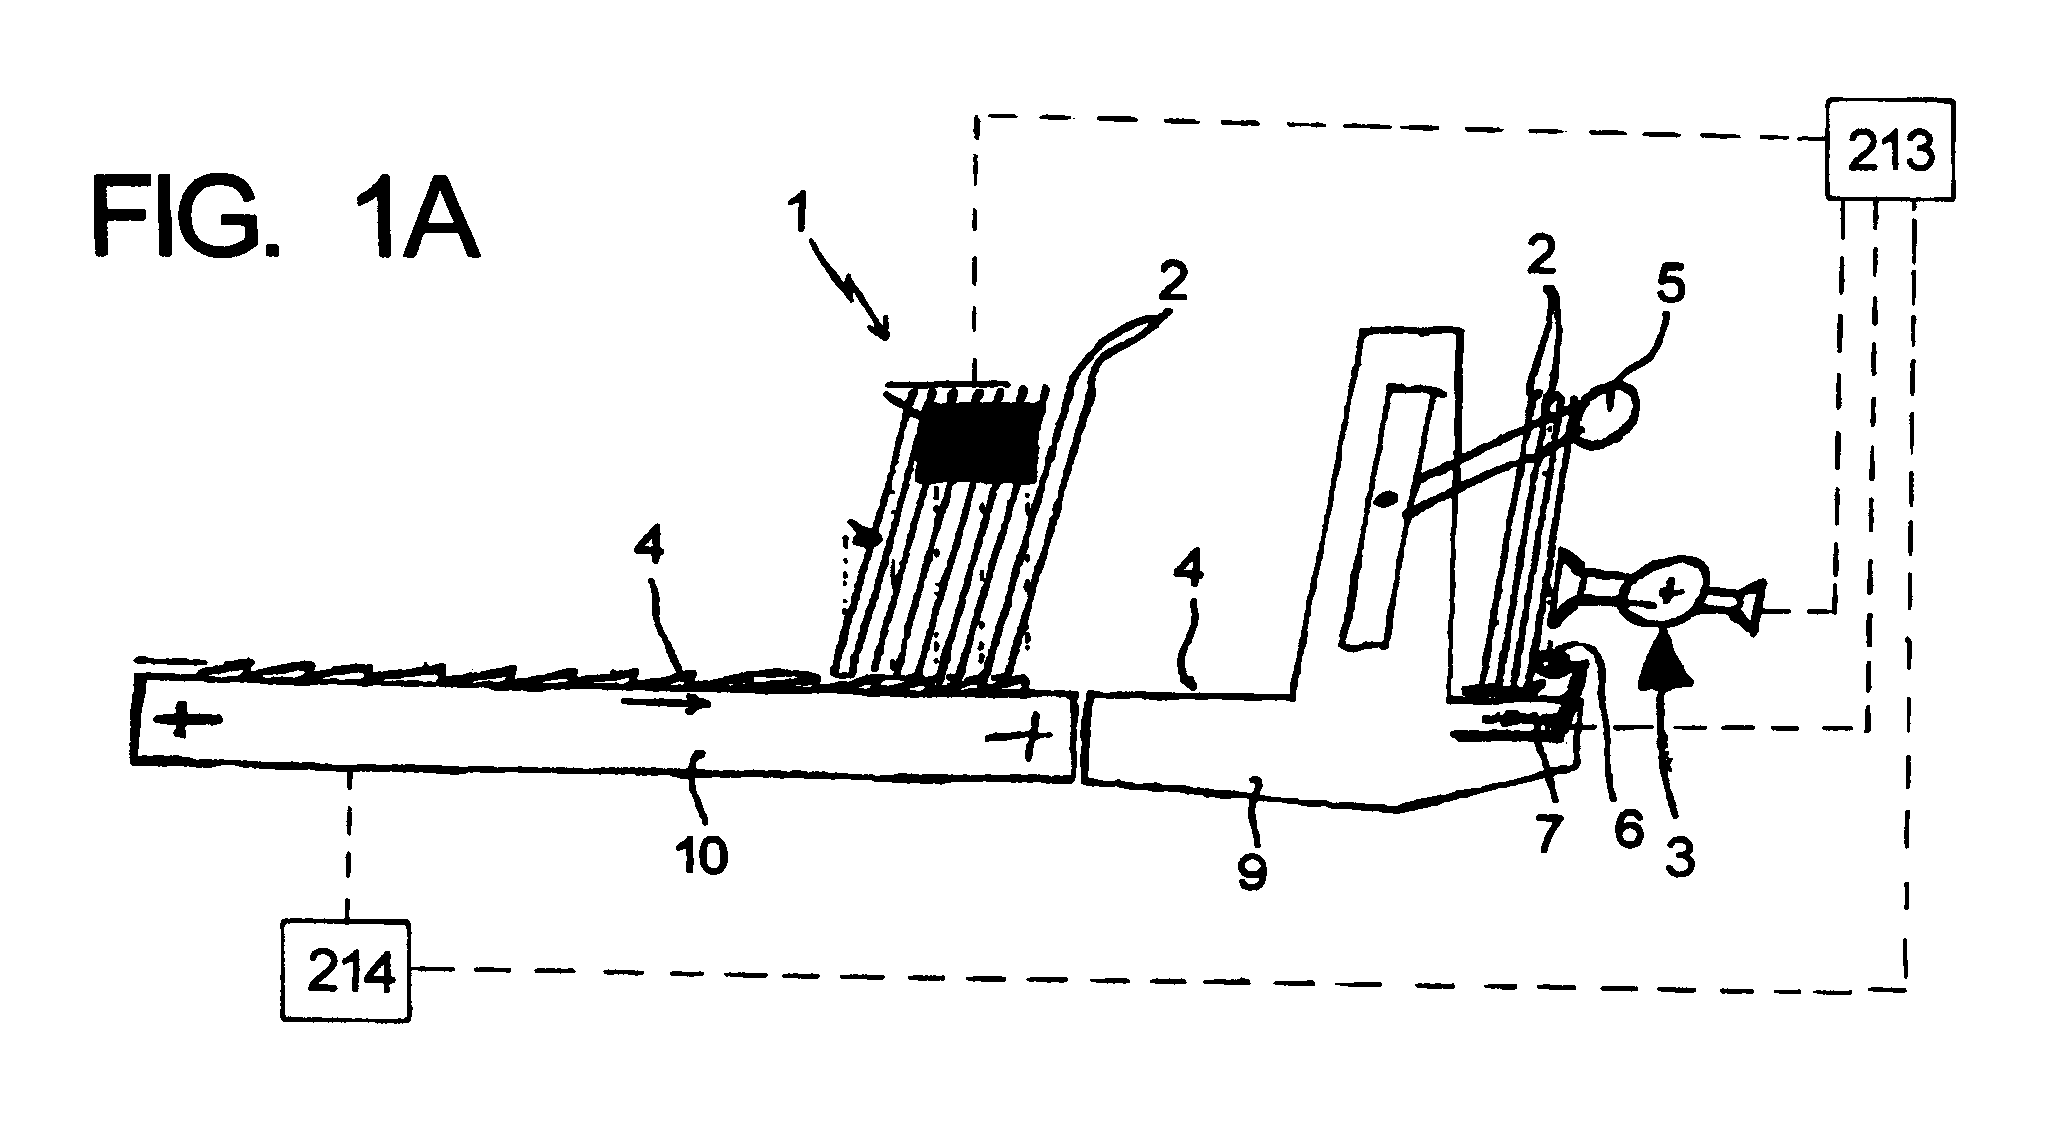 Method of feeding flattened cardboard cartons in a carton opening machine in a bottle, container, or article packaging plant, and a device therefor